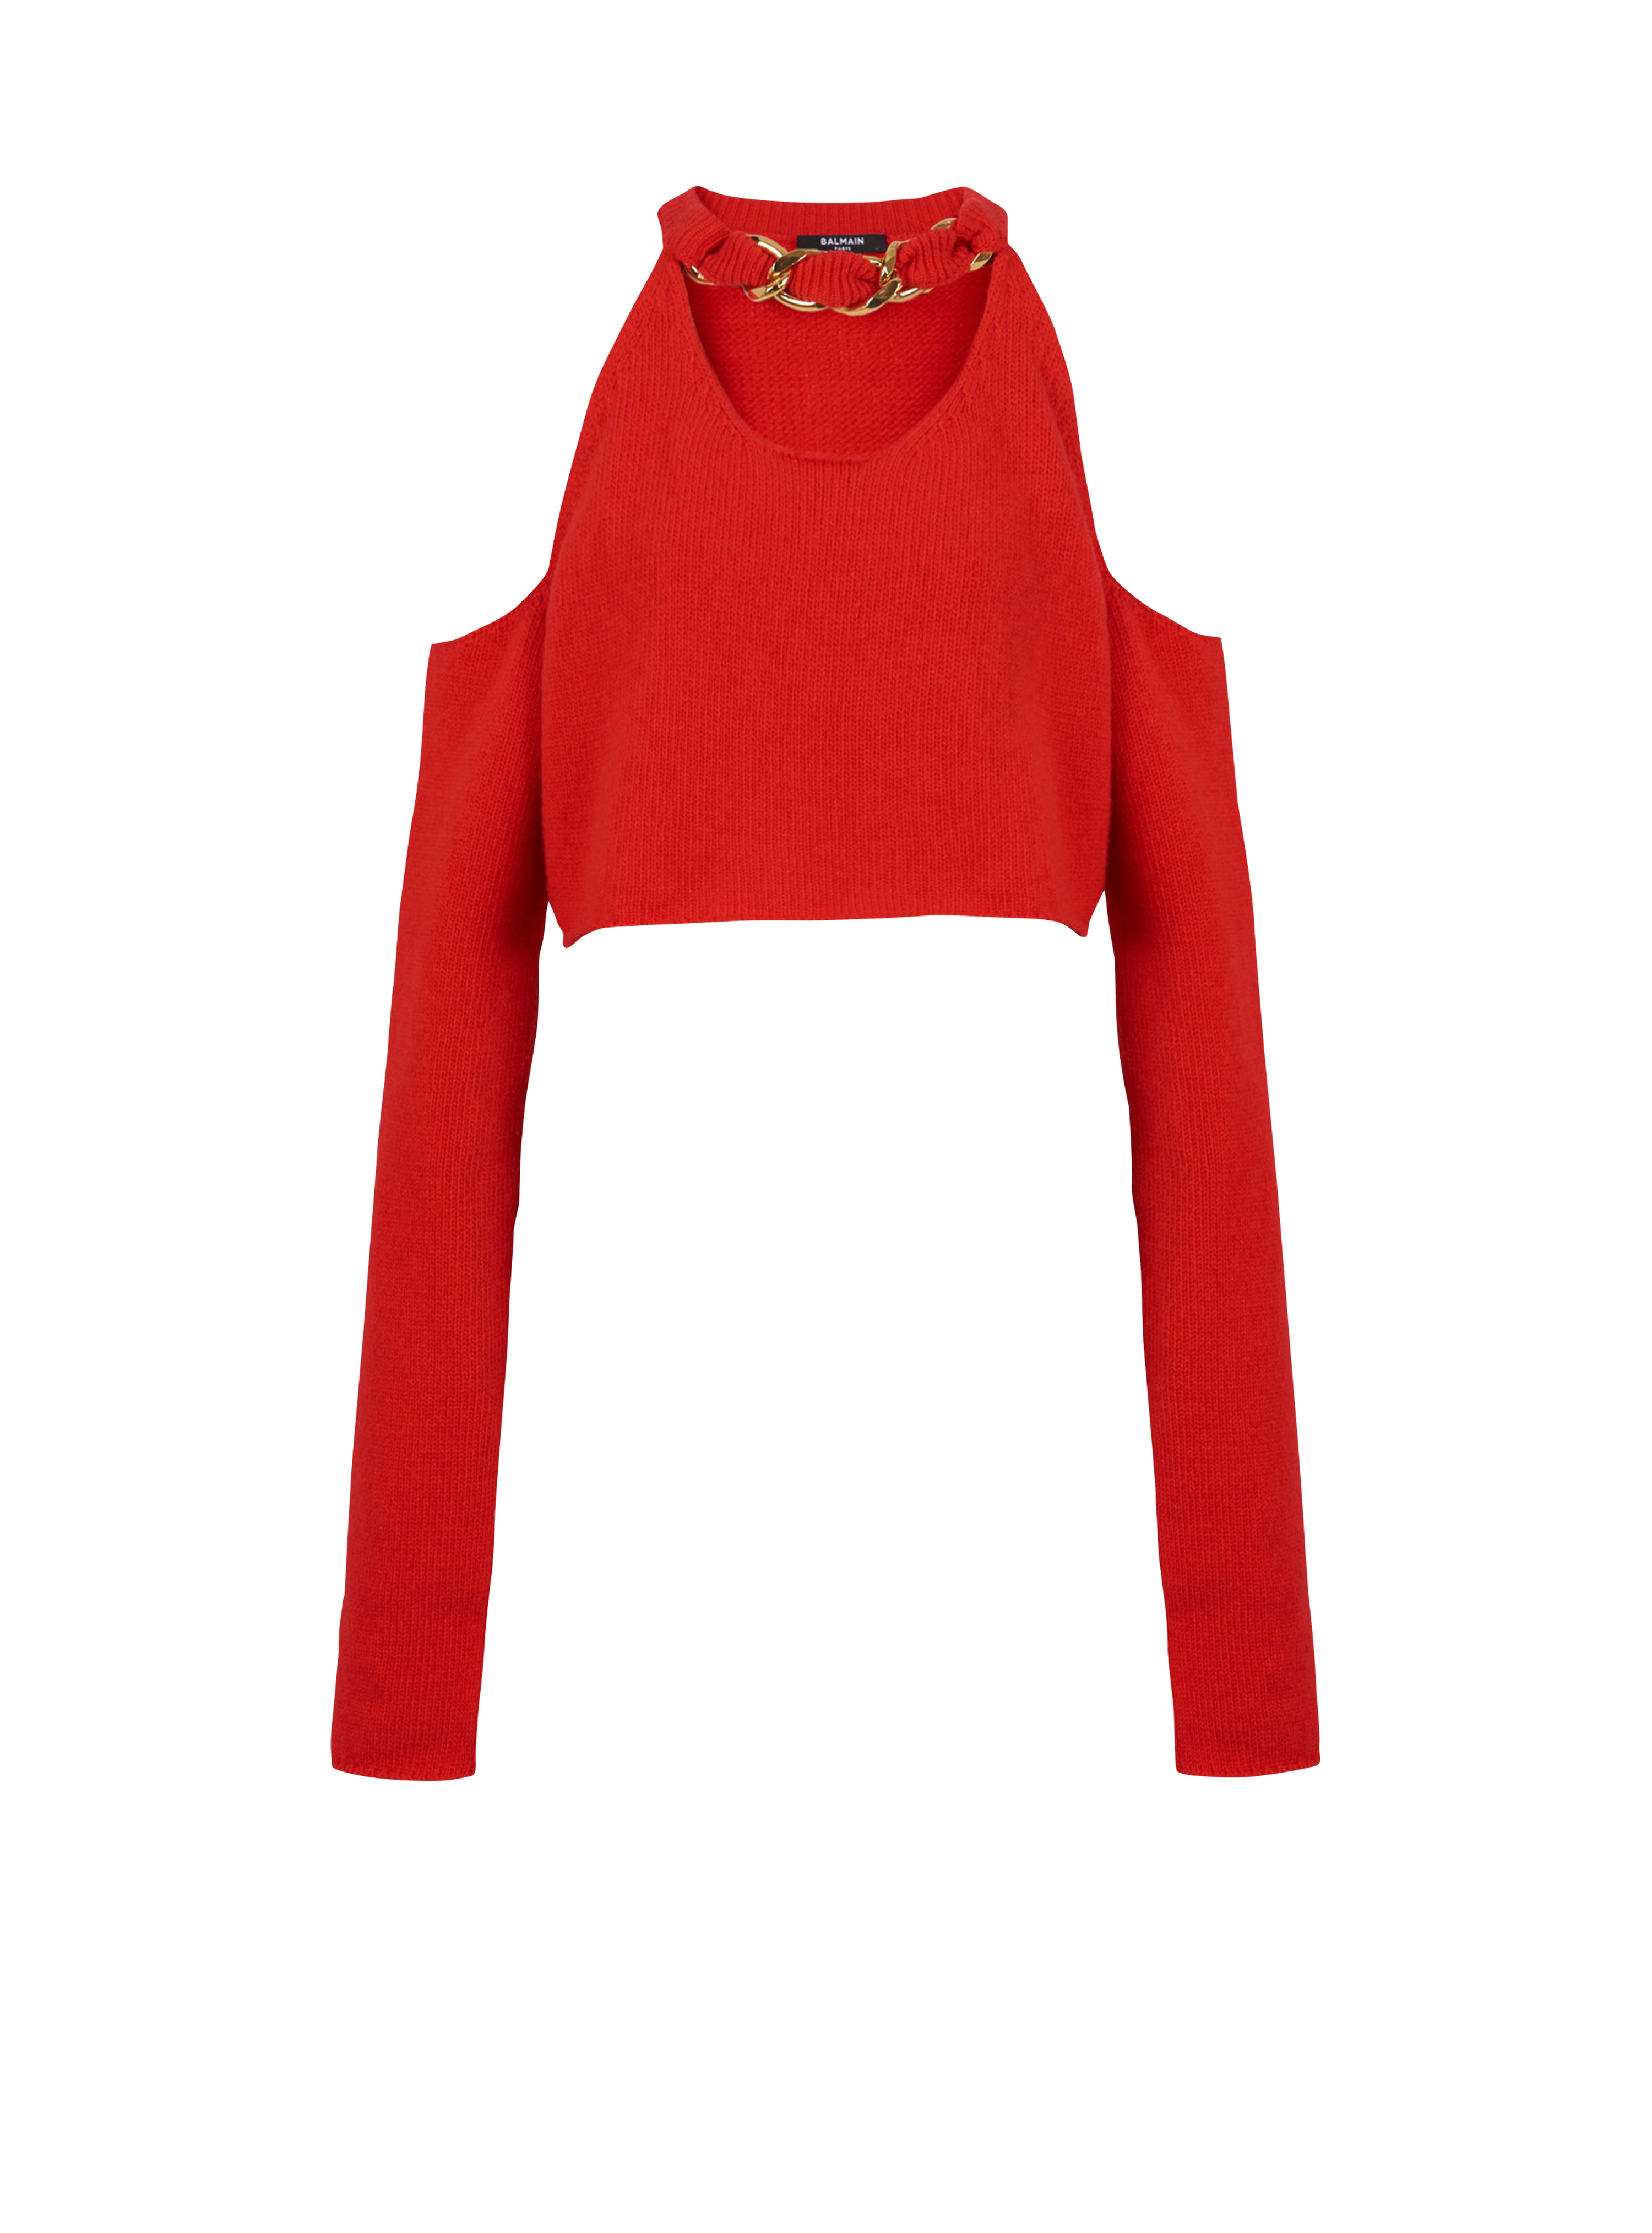 Cropped knit sweater, red, hi-res